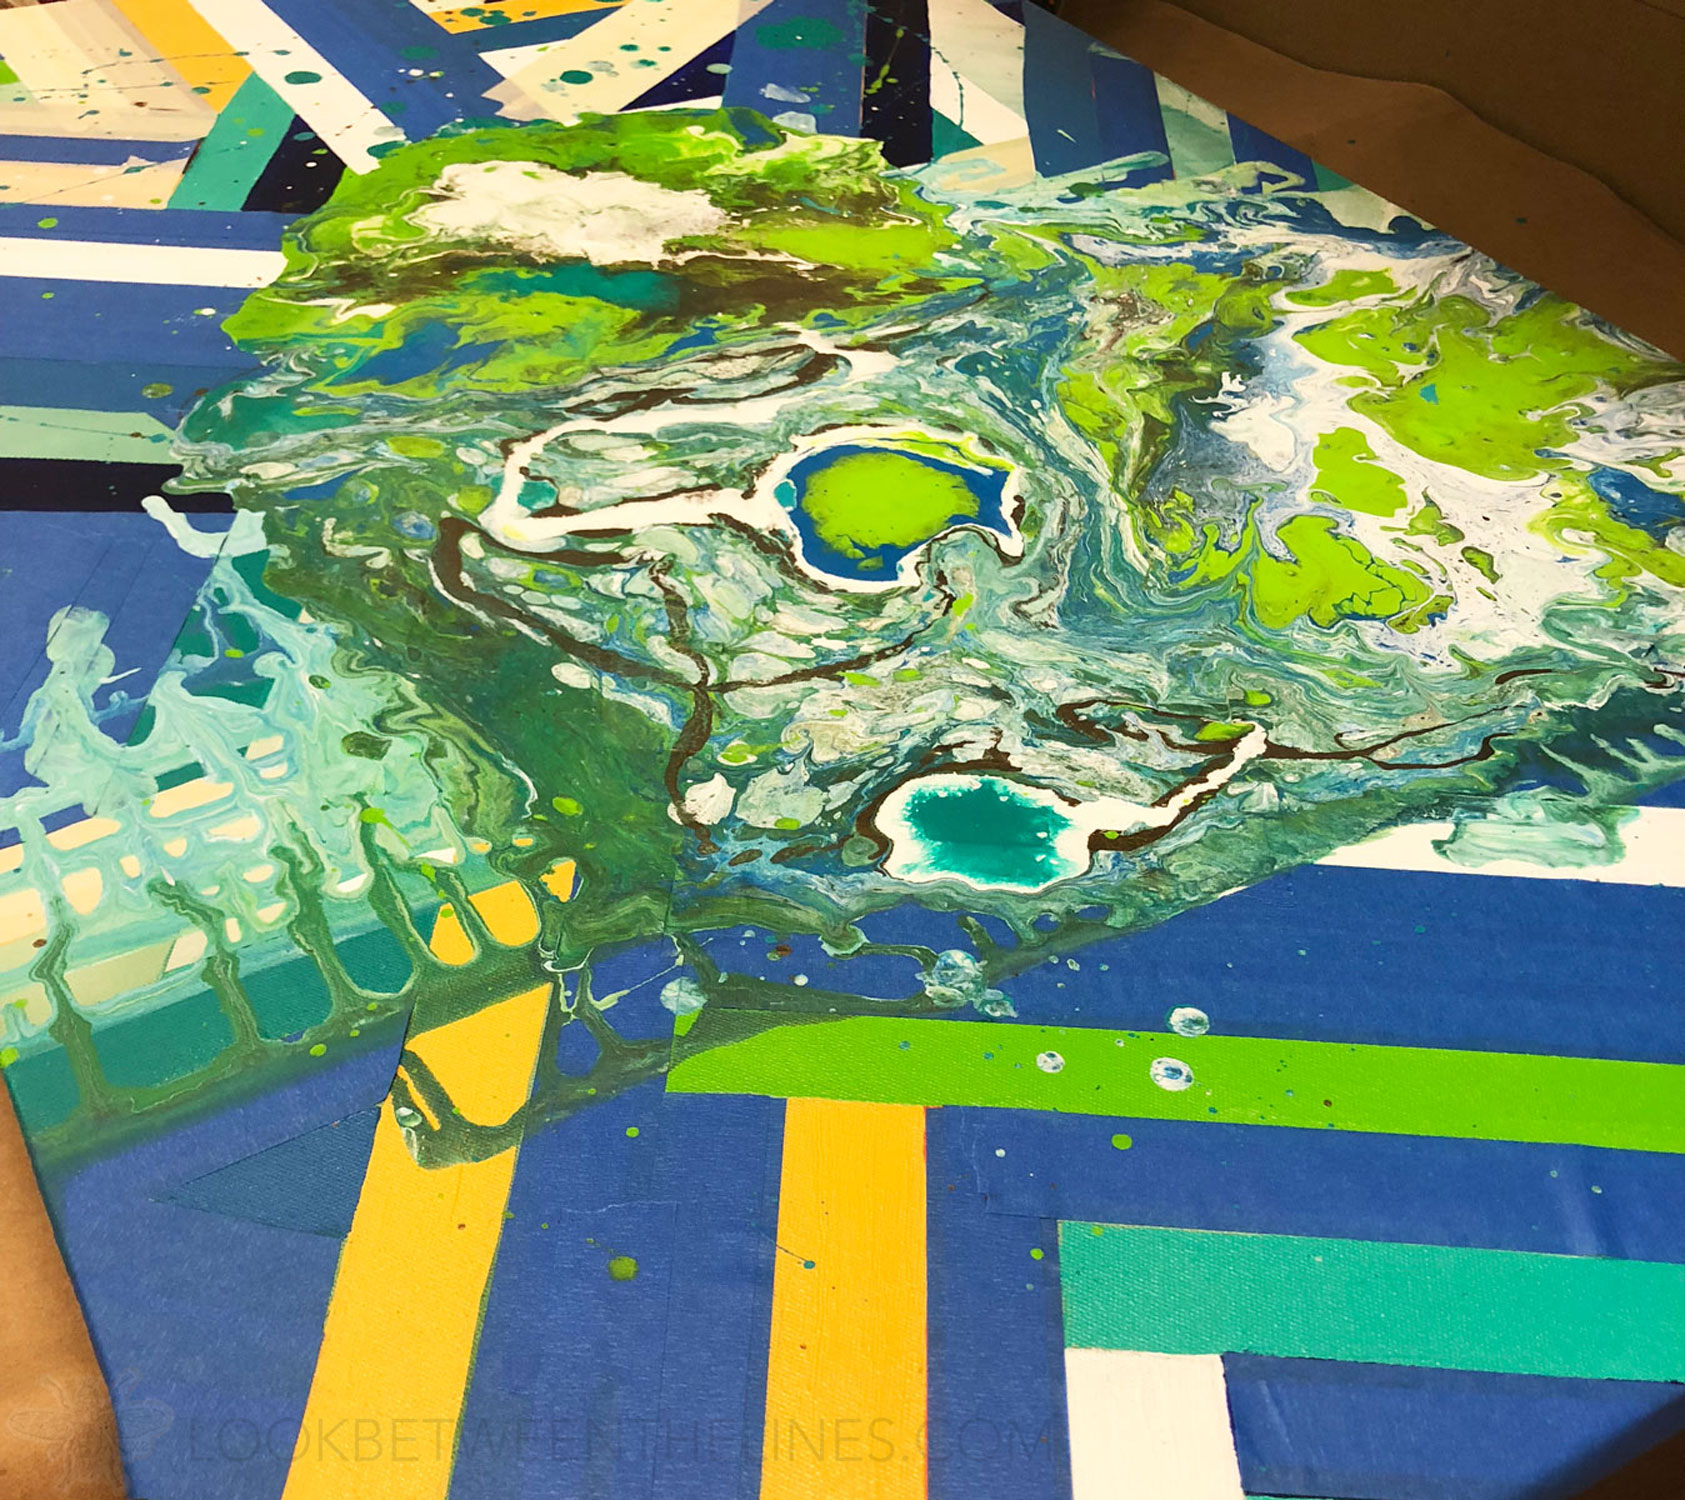 How to create an abstract work of plus how to teach it to high schoolers.